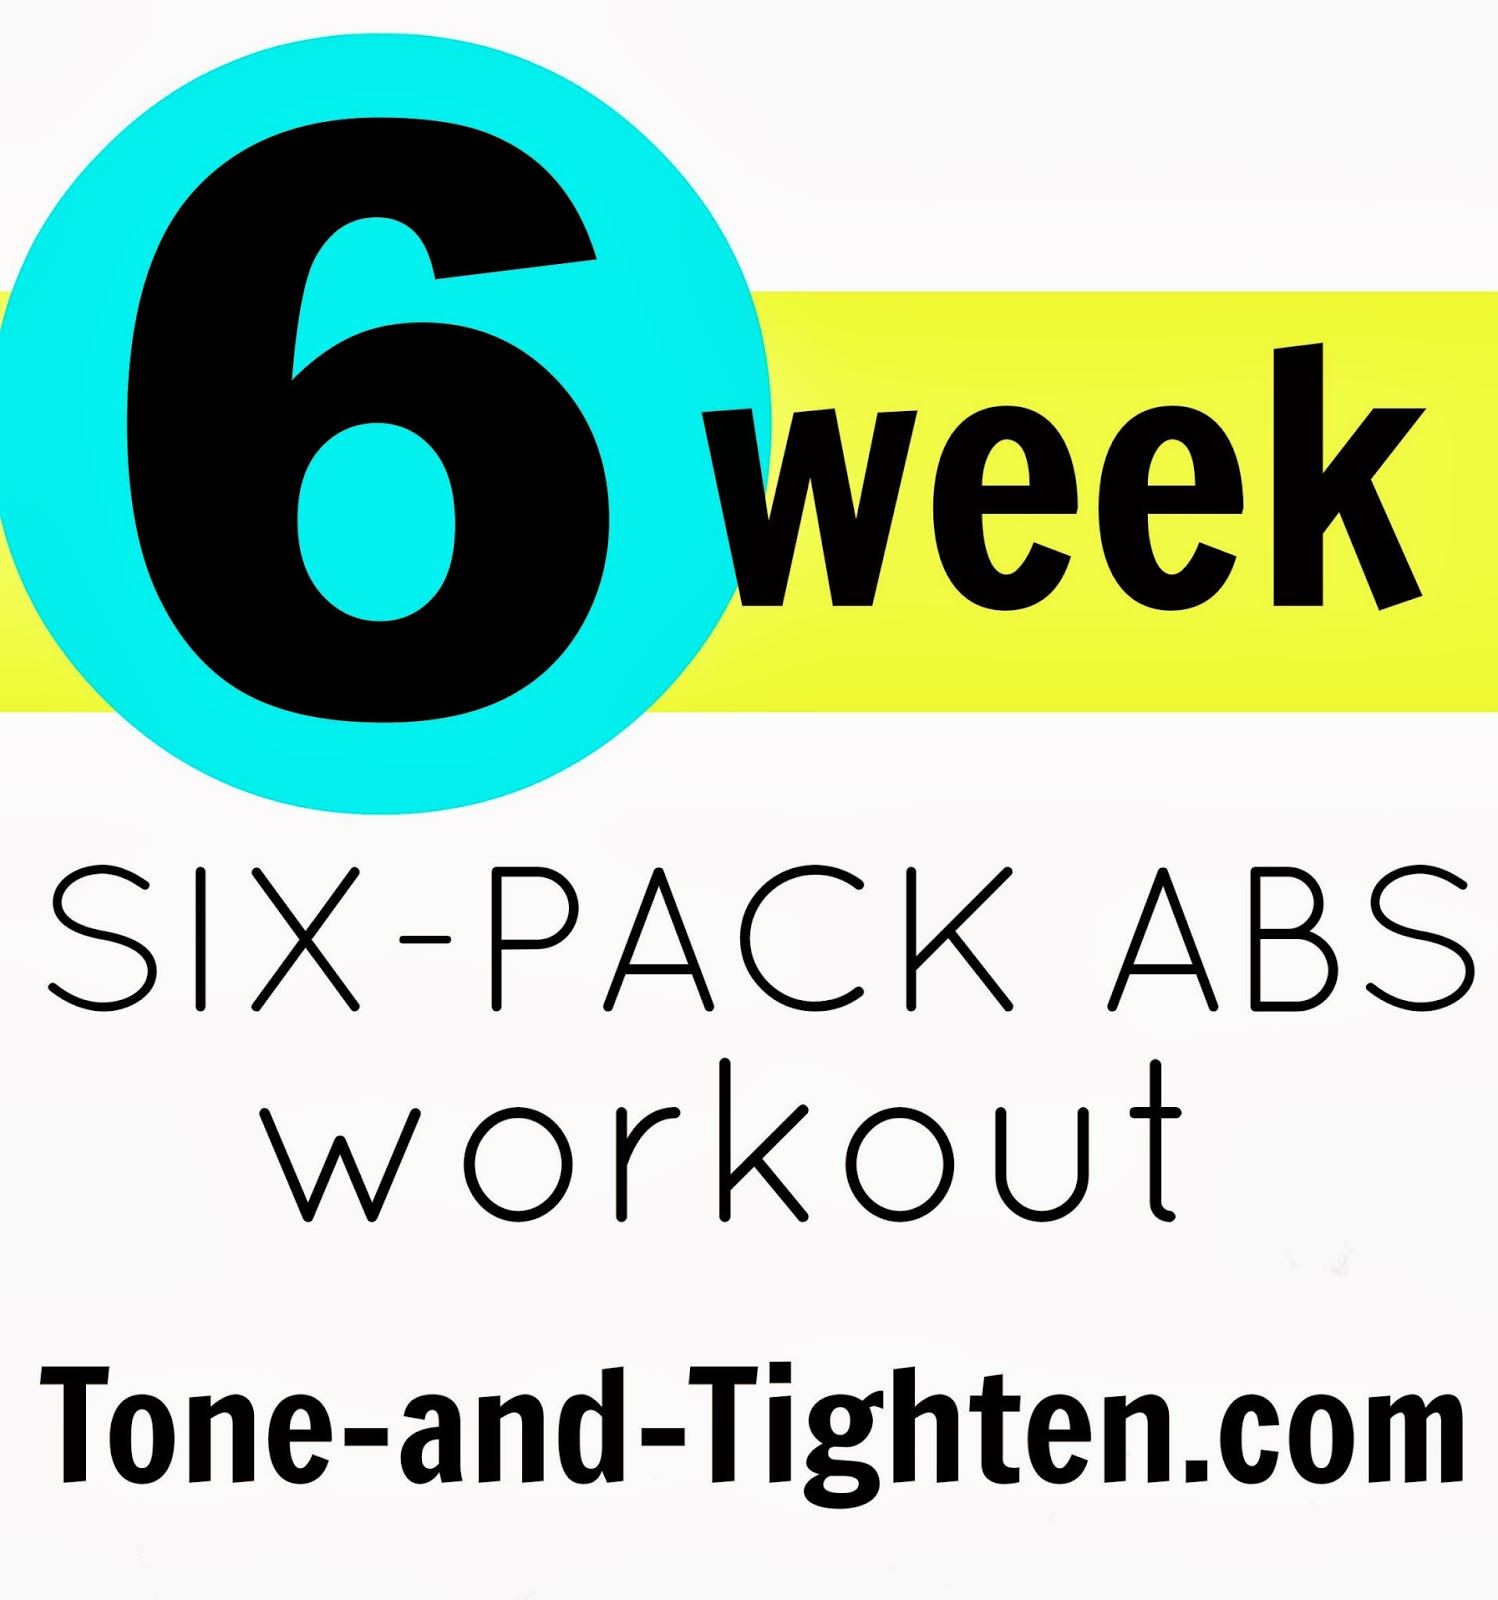 Video Workout: 6 Week Six-Pack Abs Level 1